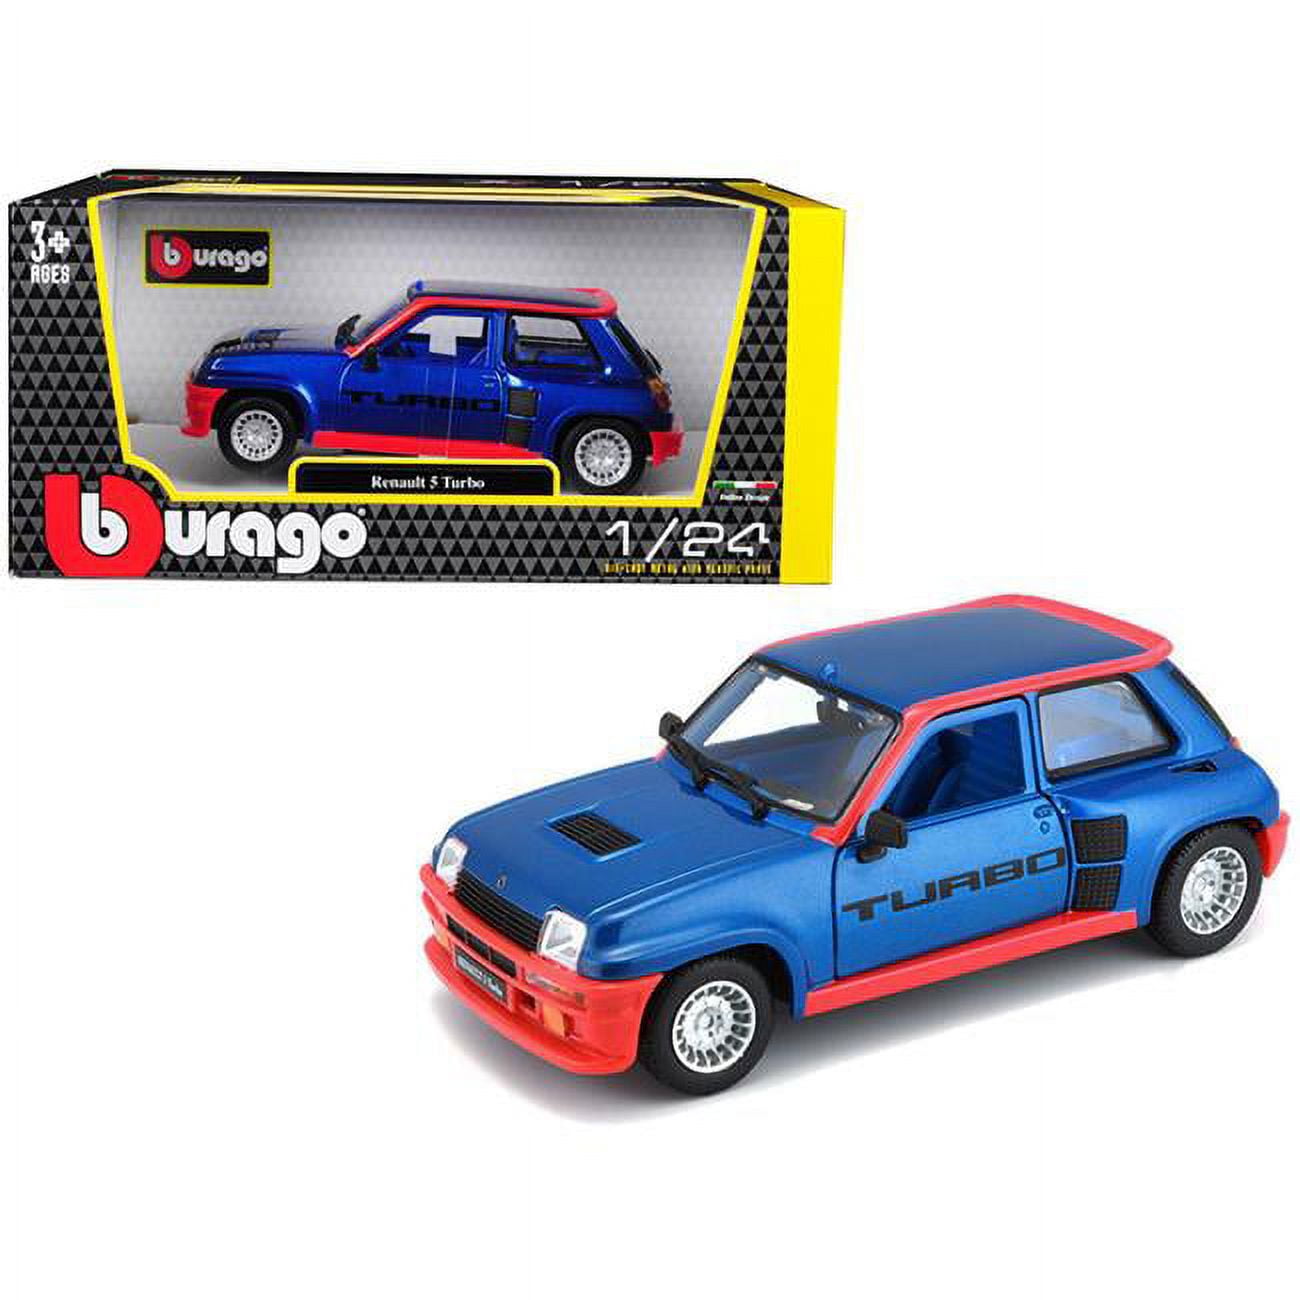 B 21088bl Renault 5 Turbo Metallic Blue With Red Accents 1-24 Diecast Model Car